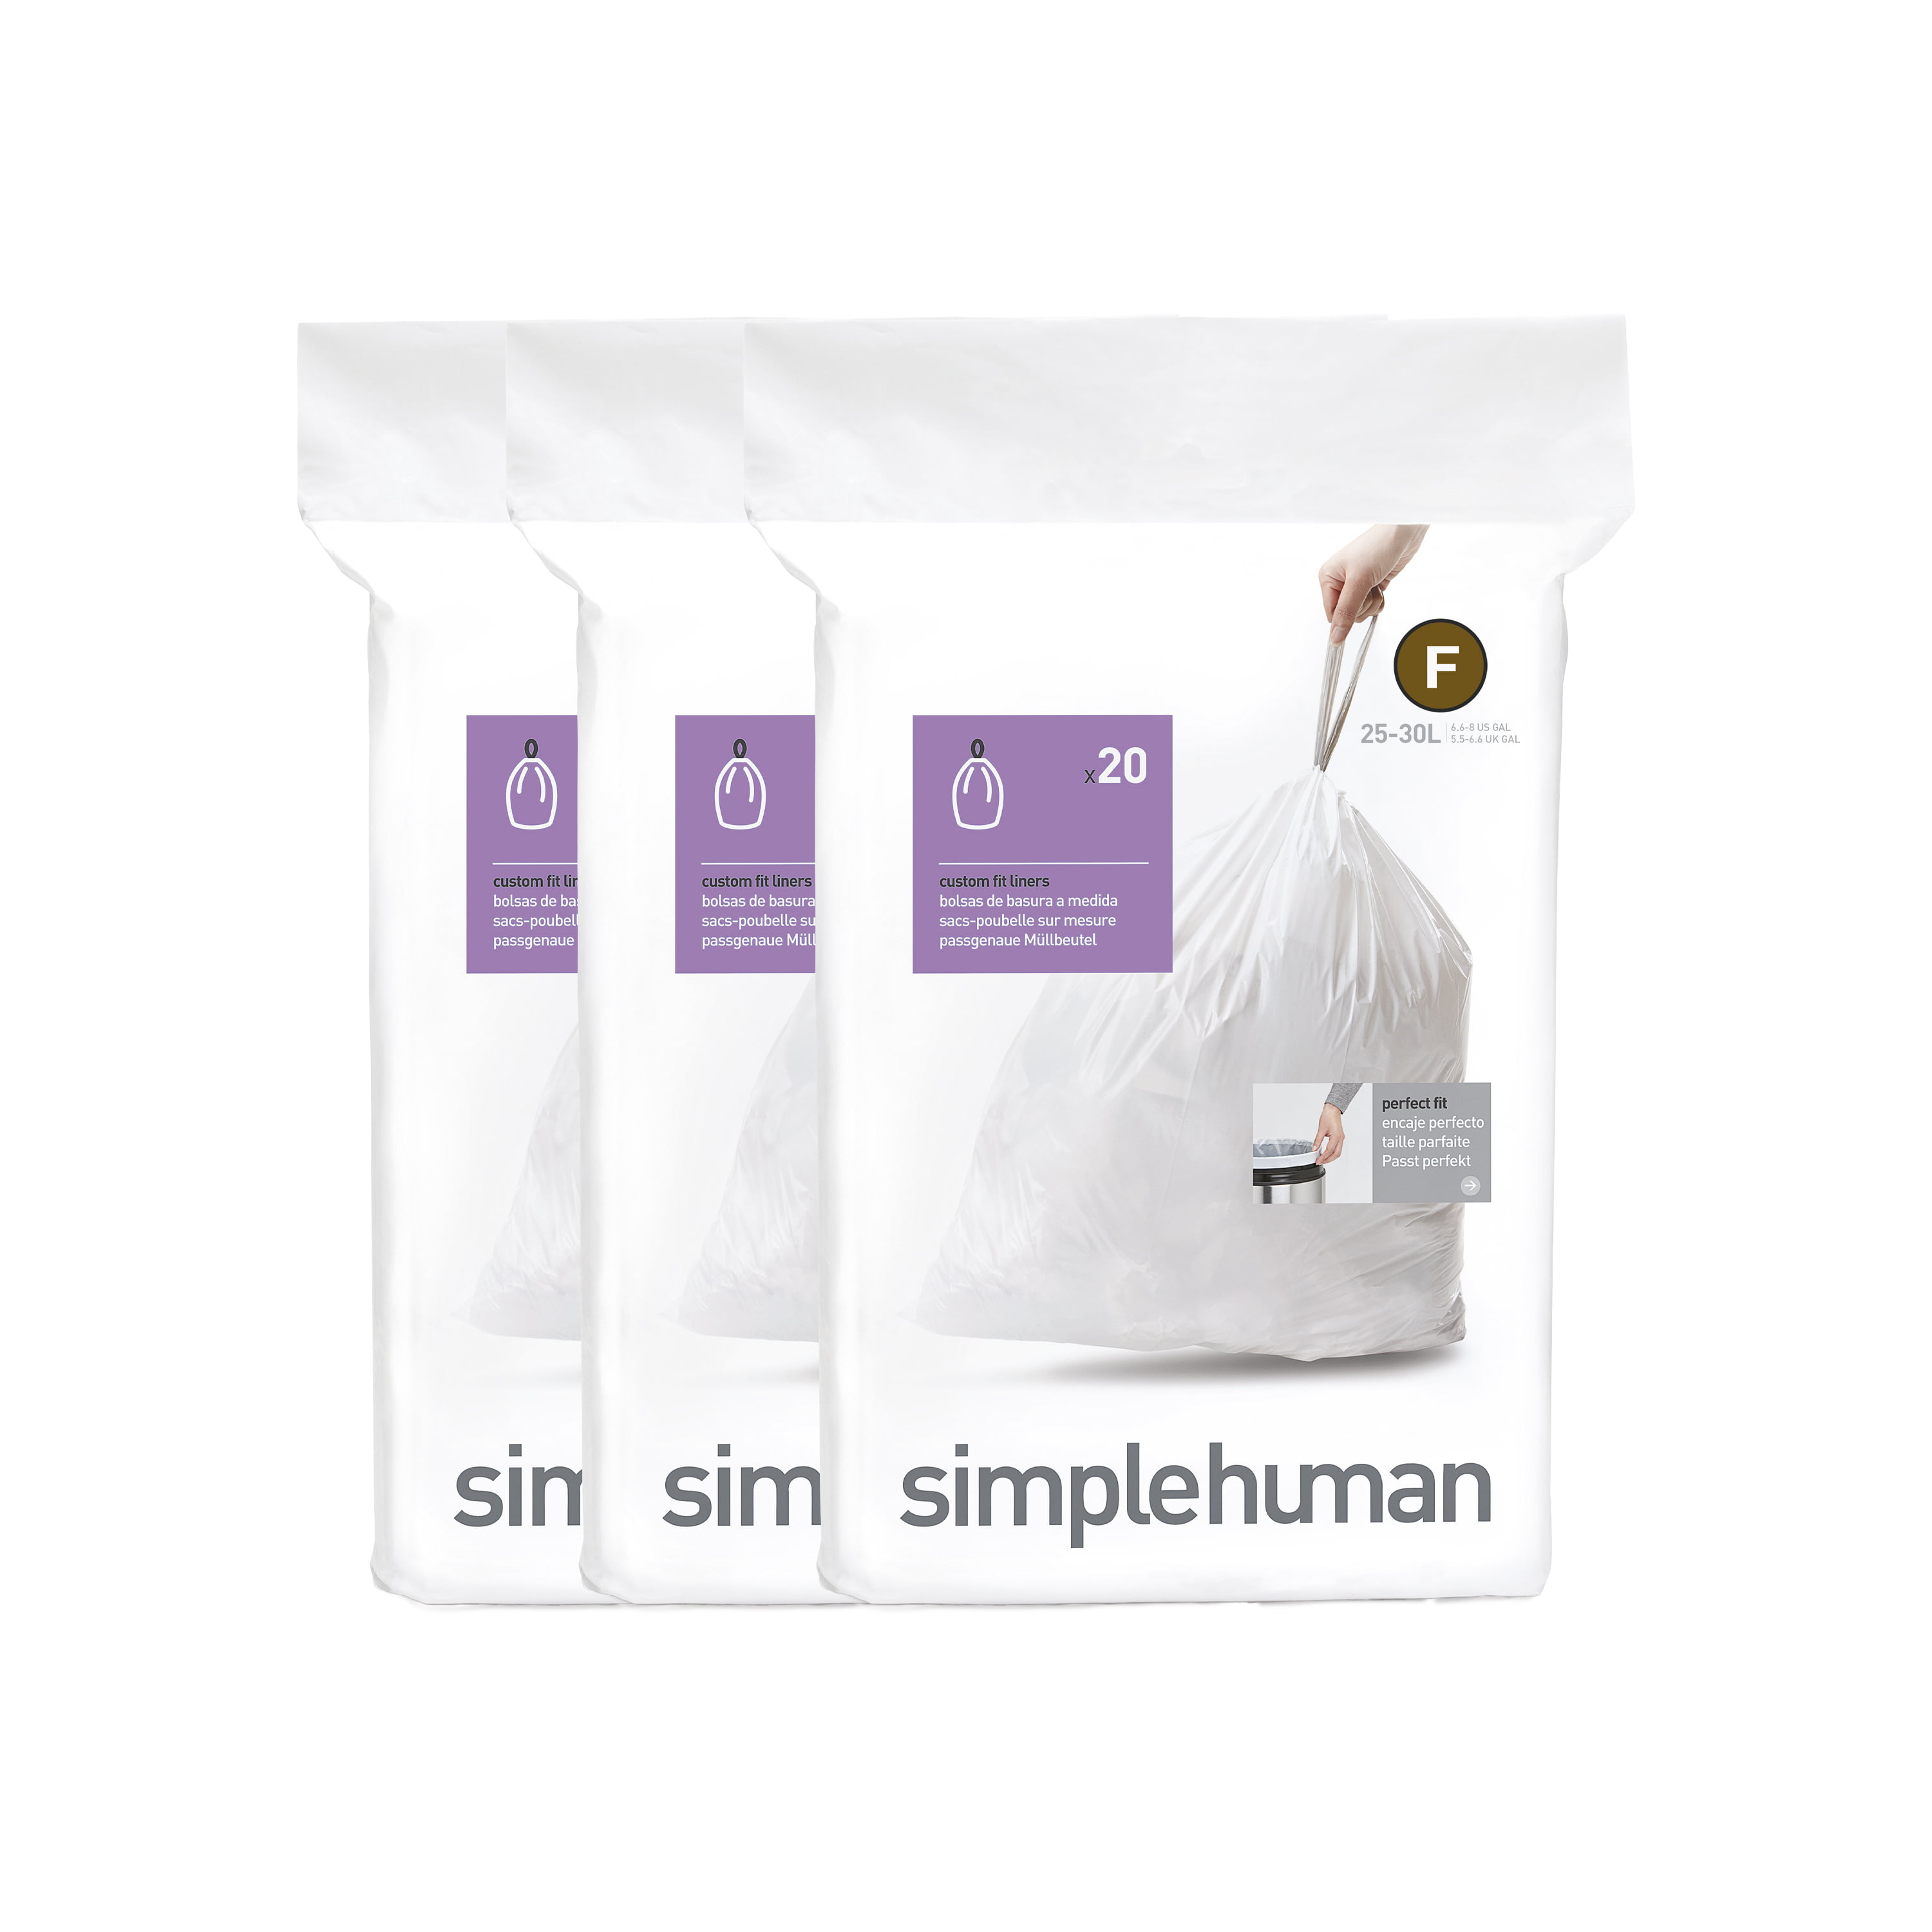 25 Liter Code F Liners Simplehuman Compatible Trash Bags 4-7 Gallon 120 ct 